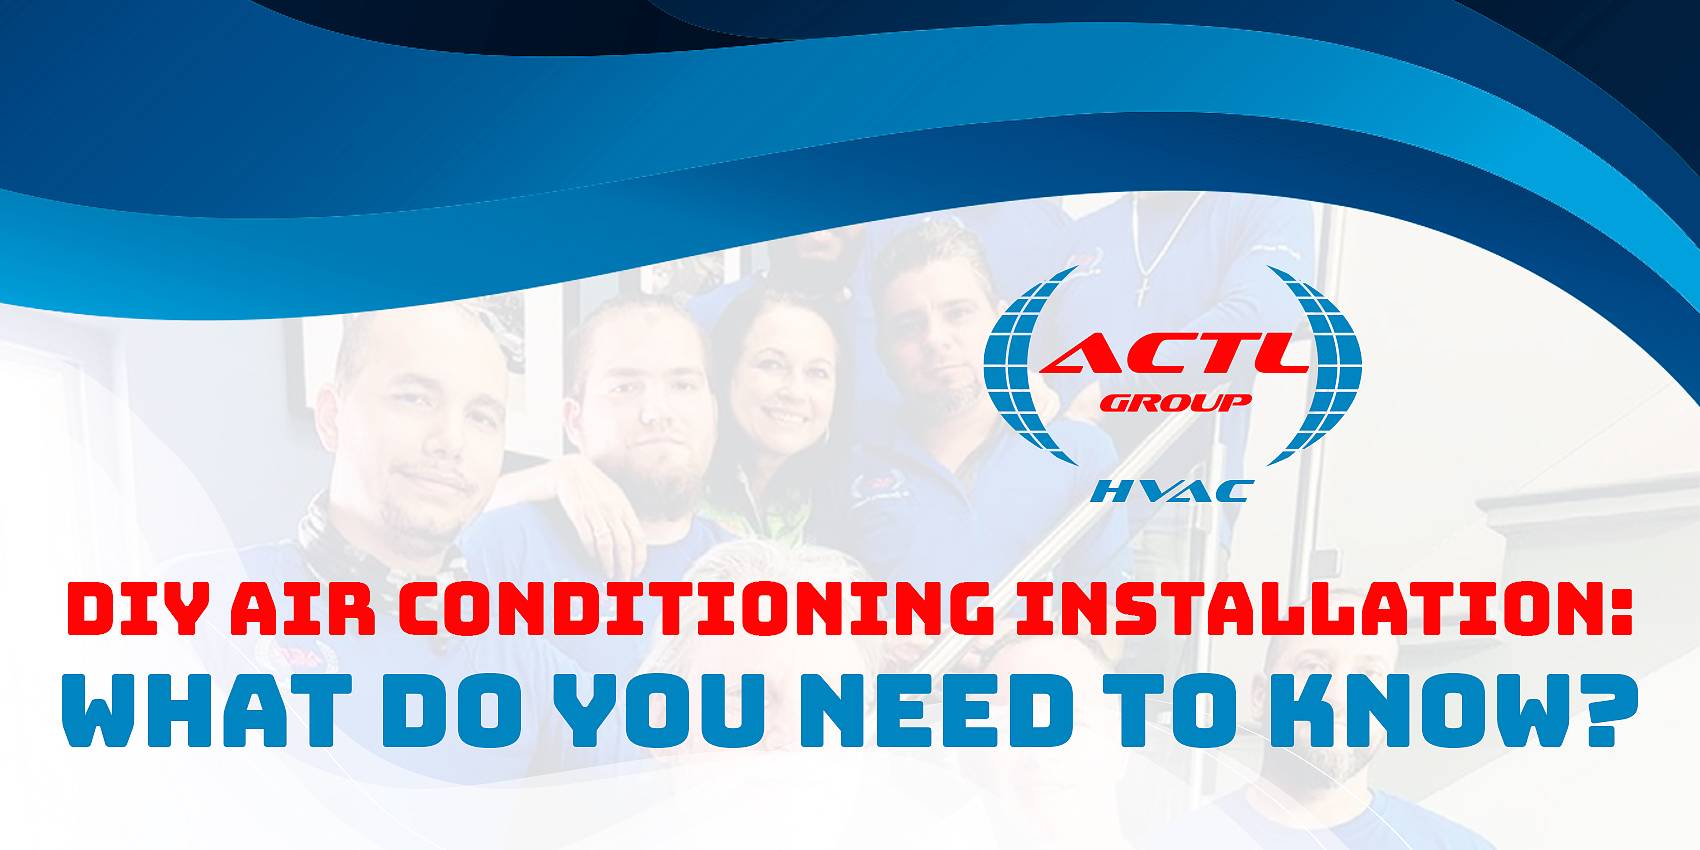 actl group hvac DIY Air Conditioning Installation: What Do You Need to Know?